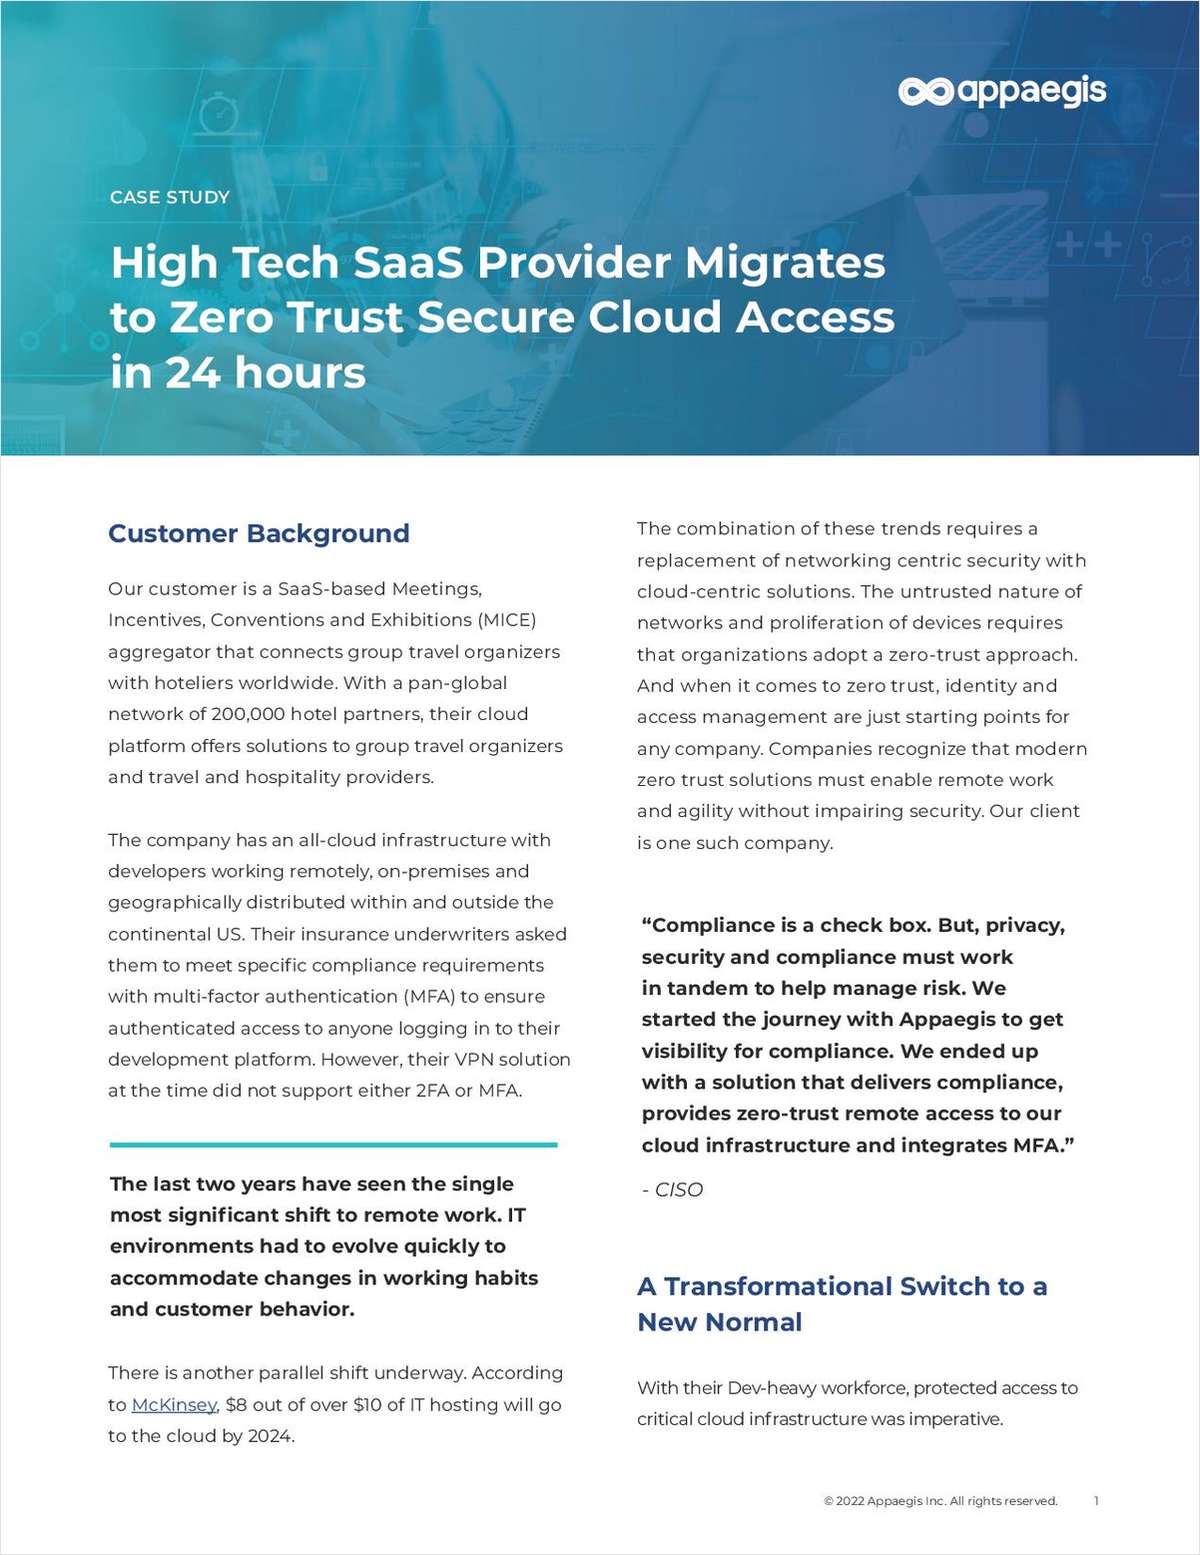 Leading SaaS Provider Migrates to Secure Cloud Access in 24 Hours